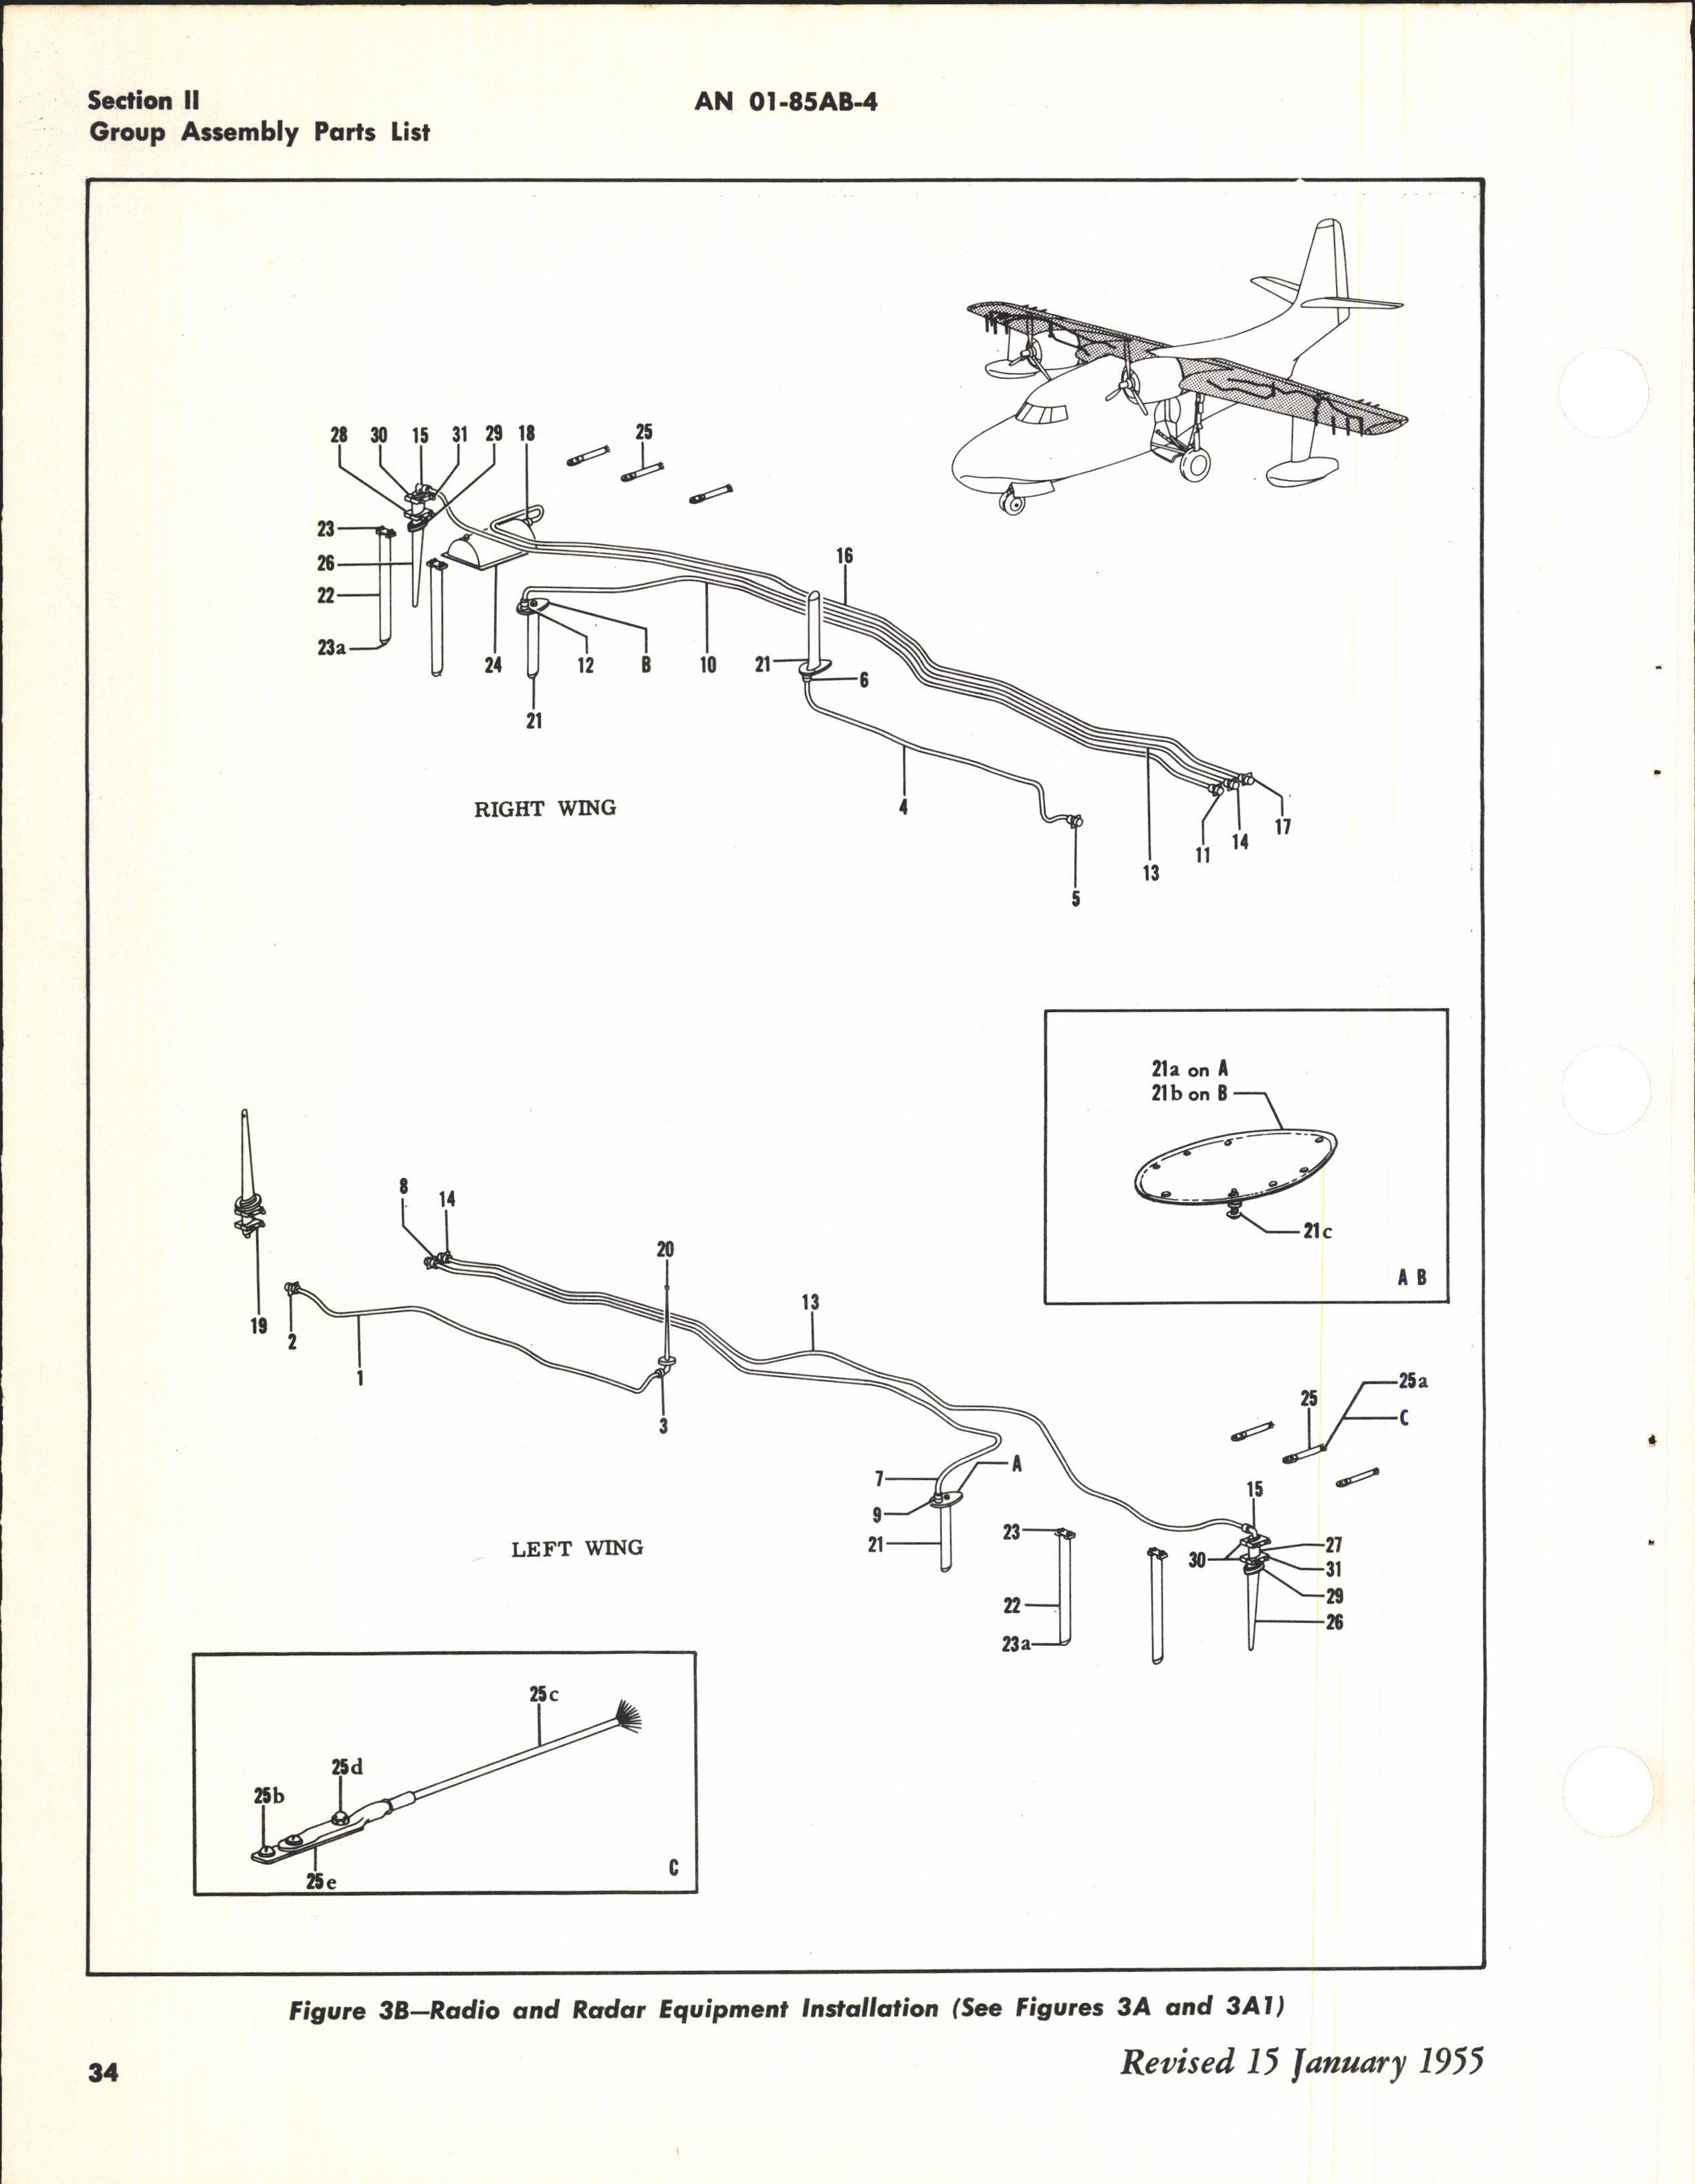 Sample page 34 from AirCorps Library document: Parts Catalog for UF-1, UF-1T, and SA-16A-GR Aircraft